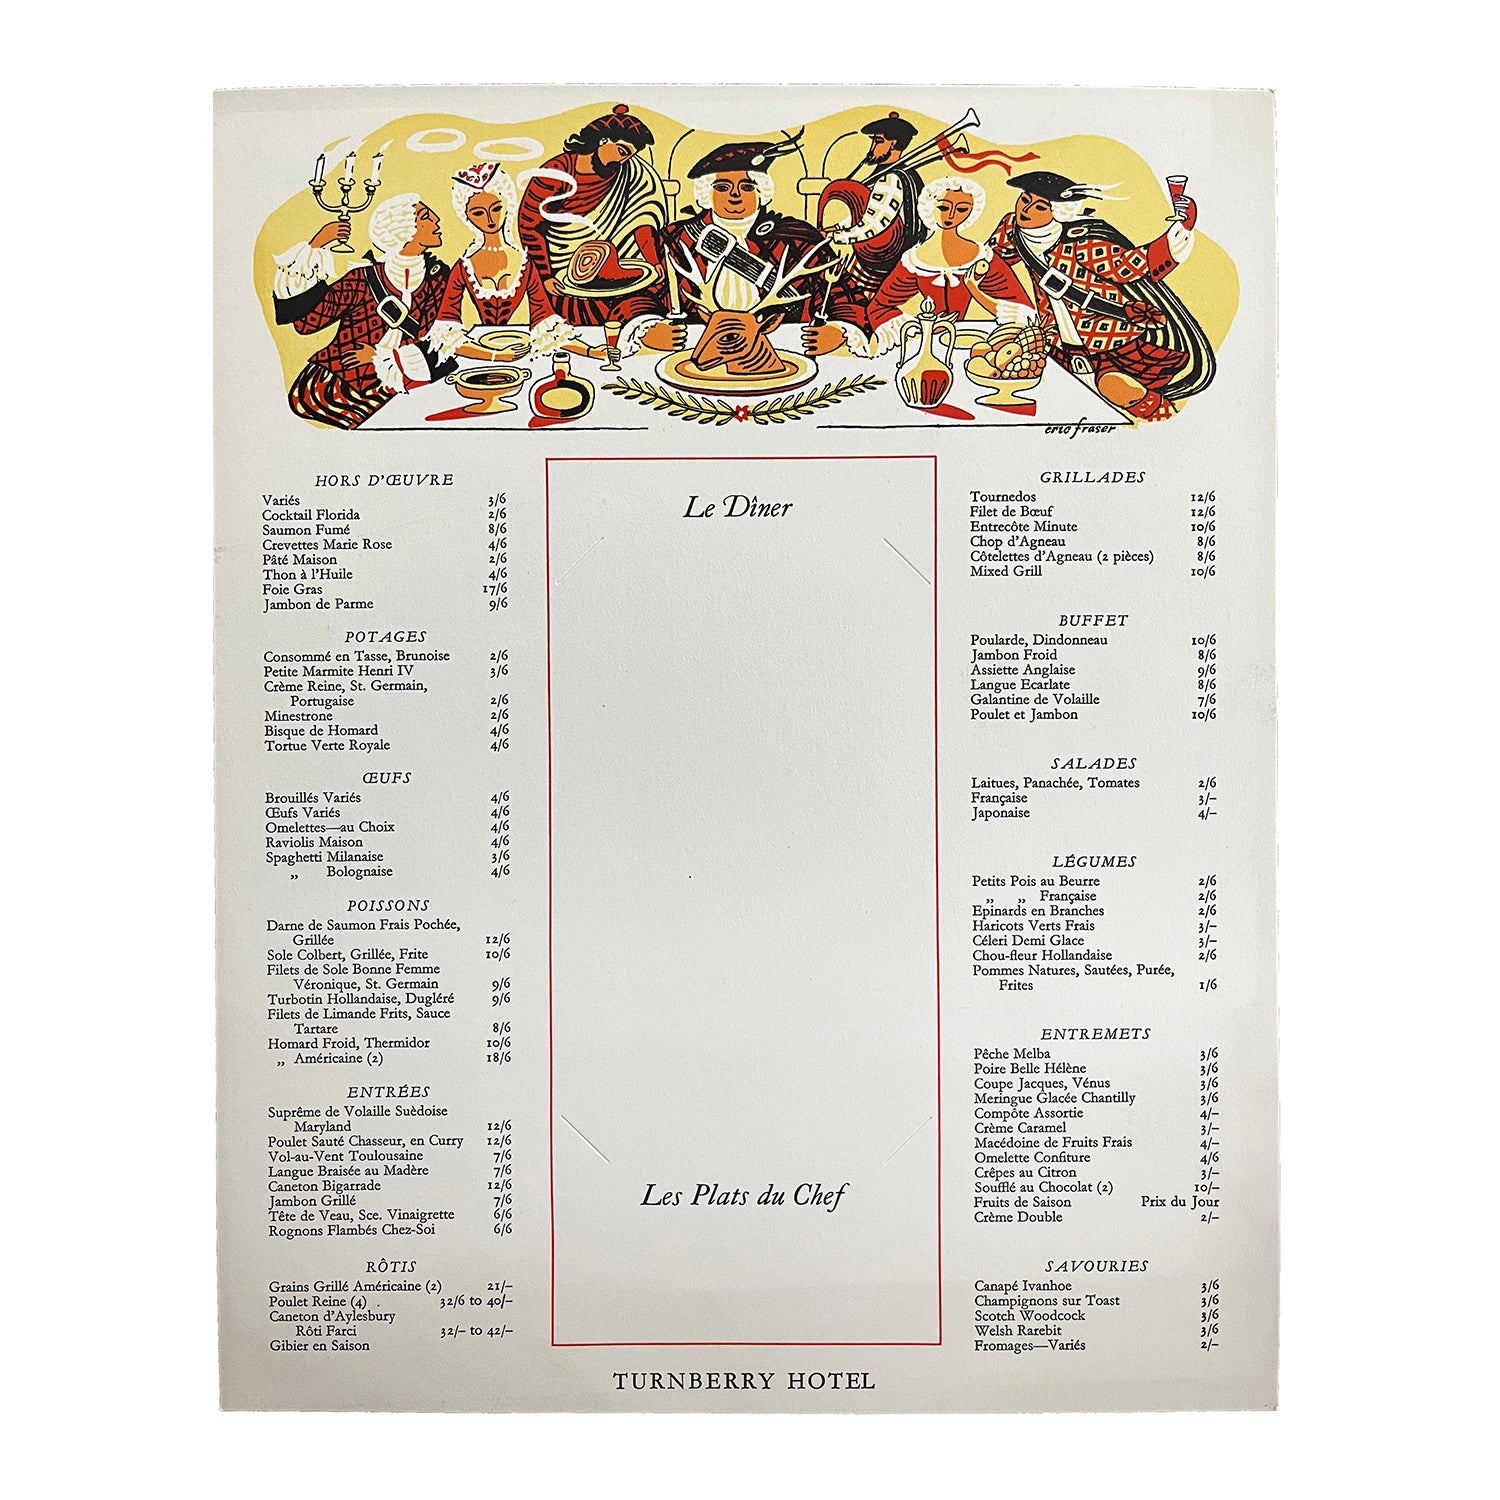 original railway hotel menu from the famous Turnberry Hotel and golf resort, Ayrshire, c. 1960. 